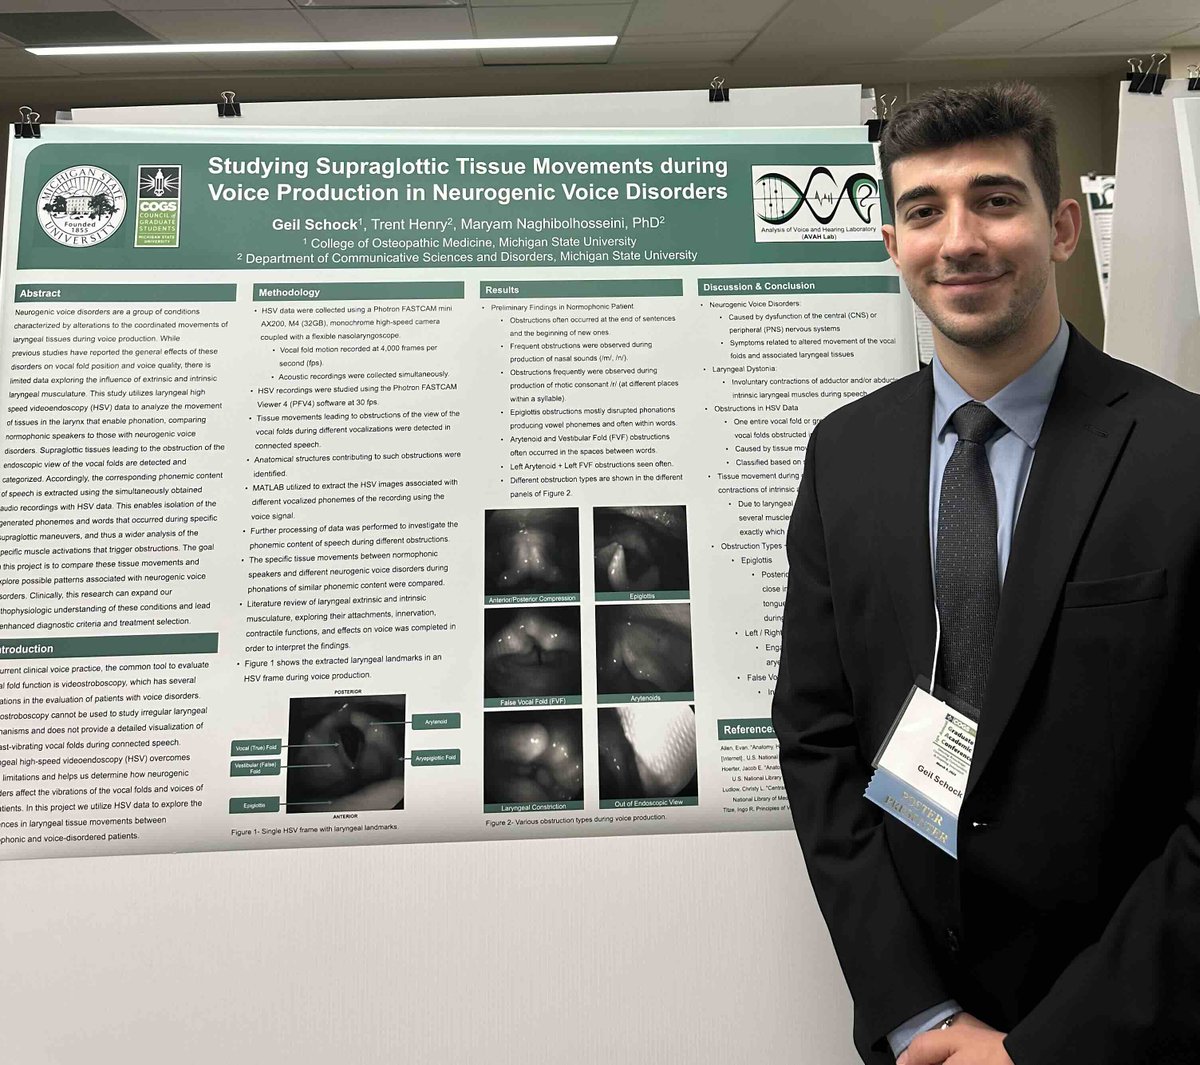 Congratulations to Geil Schock for winning third place in the Poster Presentation competition at The 16th Annual Graduate Academic Conference for his research with AVAH Lab! The conference was held by MSU Council of Graduate Students (COGS) on March 9, 2024.